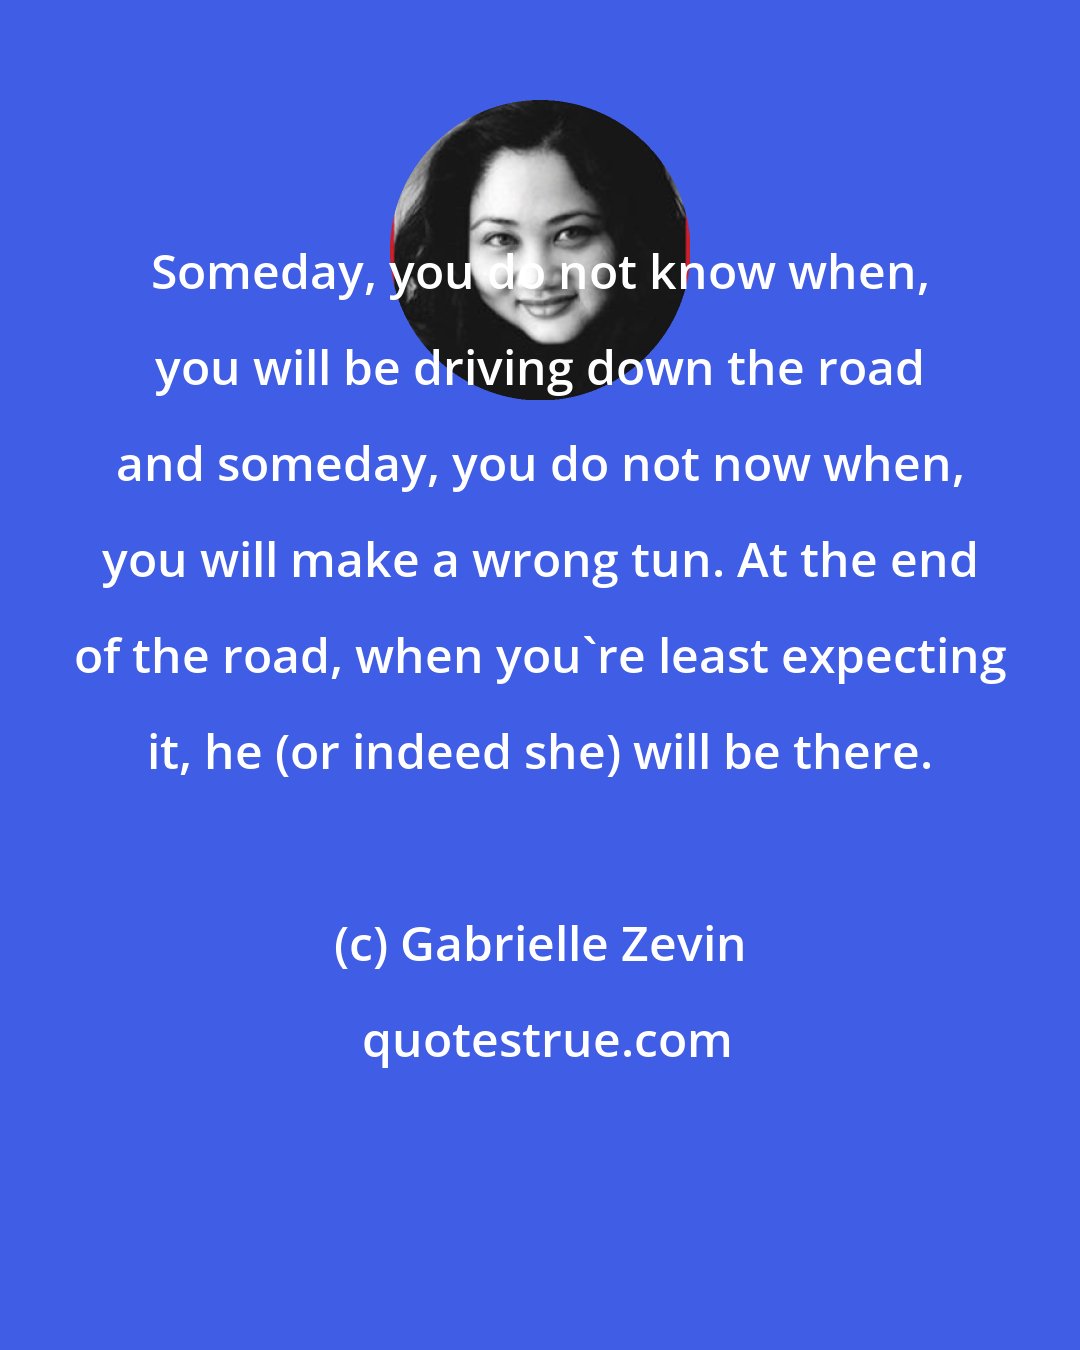 Gabrielle Zevin: Someday, you do not know when, you will be driving down the road and someday, you do not now when, you will make a wrong tun. At the end of the road, when you're least expecting it, he (or indeed she) will be there.